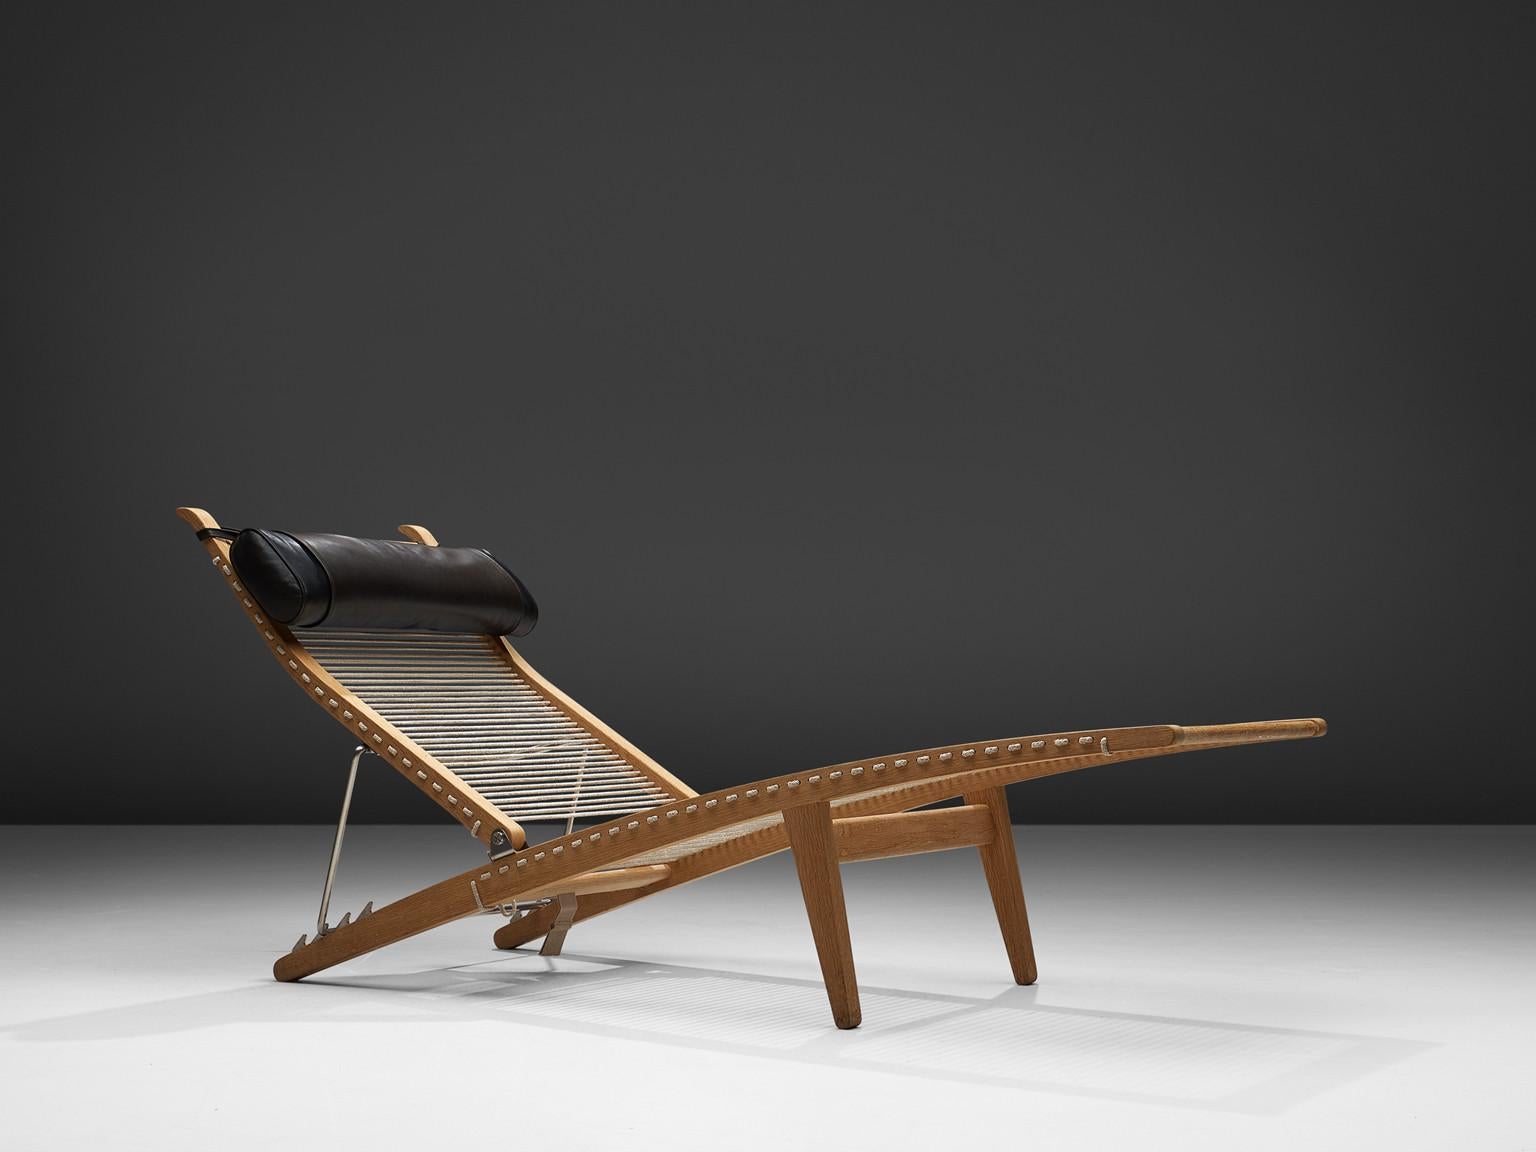 Hans J. Wegner, deck chair 'PP524', oak, rope, stainless steel, Denmark, 1958

Beautiful Hans J. Wegner Deck chair, also known as the 'PP 524' chair. The chair was first shown at the Copenhagen Cabinet-Makers Guild Exhibition in 1958 and produced